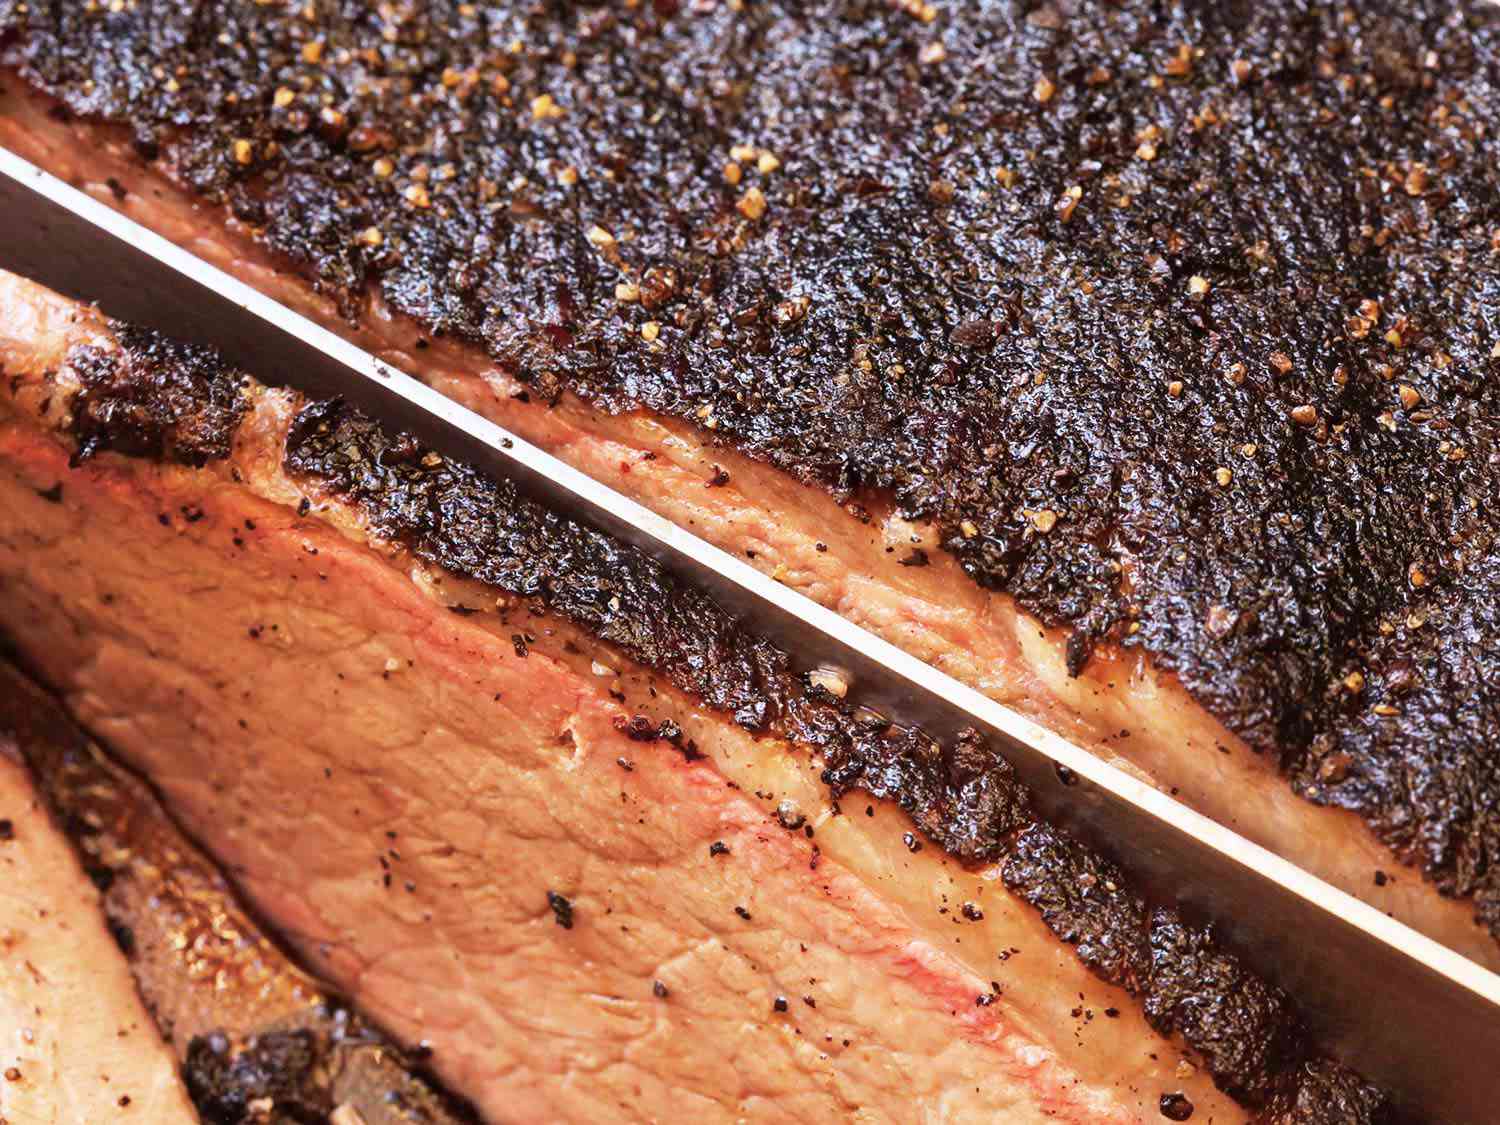 A close up of a sous vide brisket being cut.